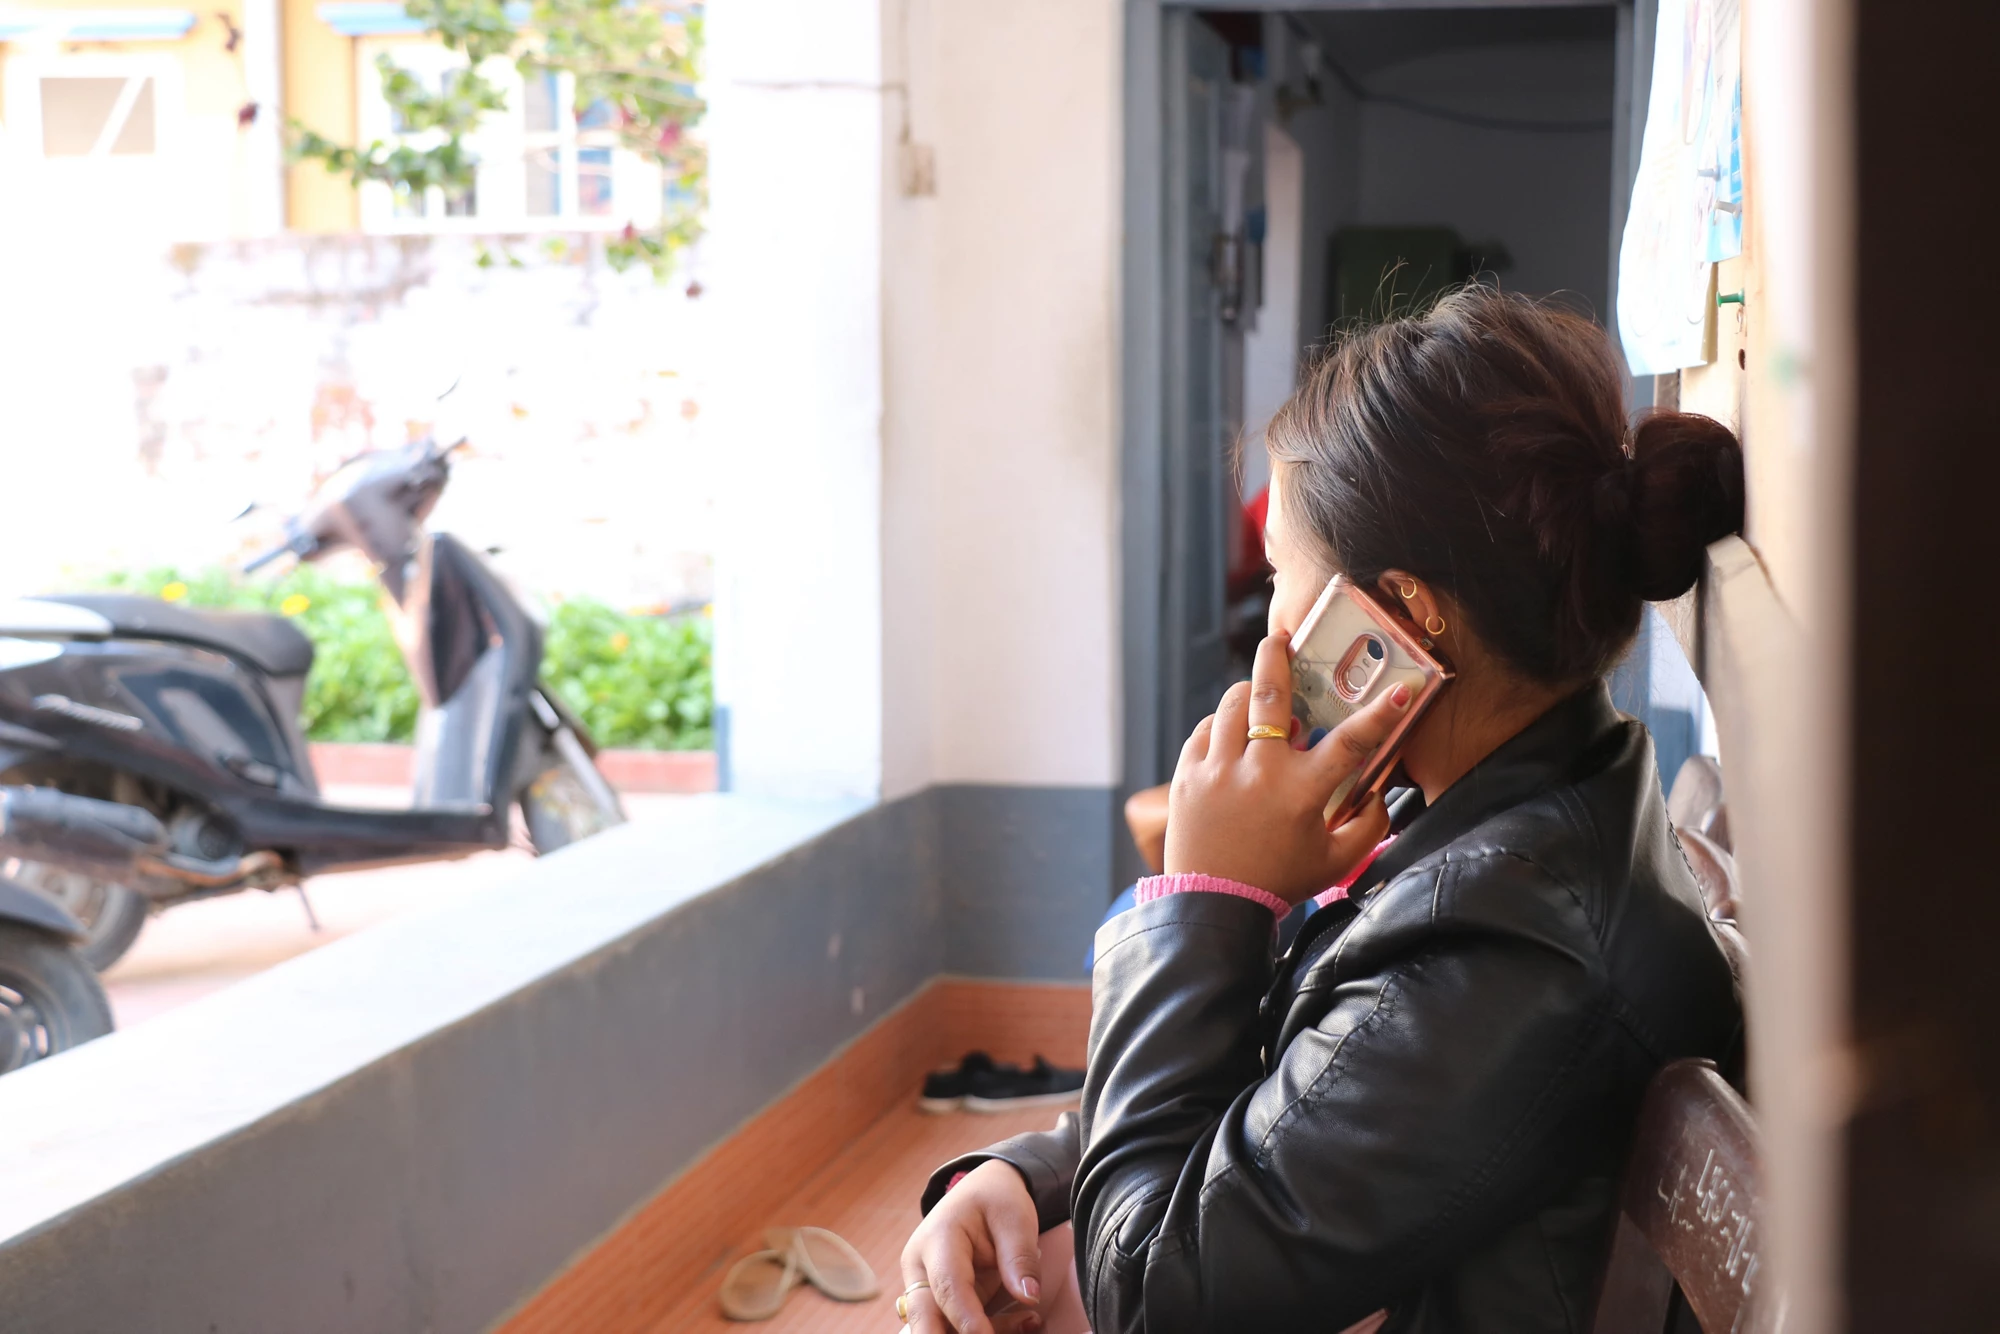 A women speaking on her mobile phone facing away from the camera